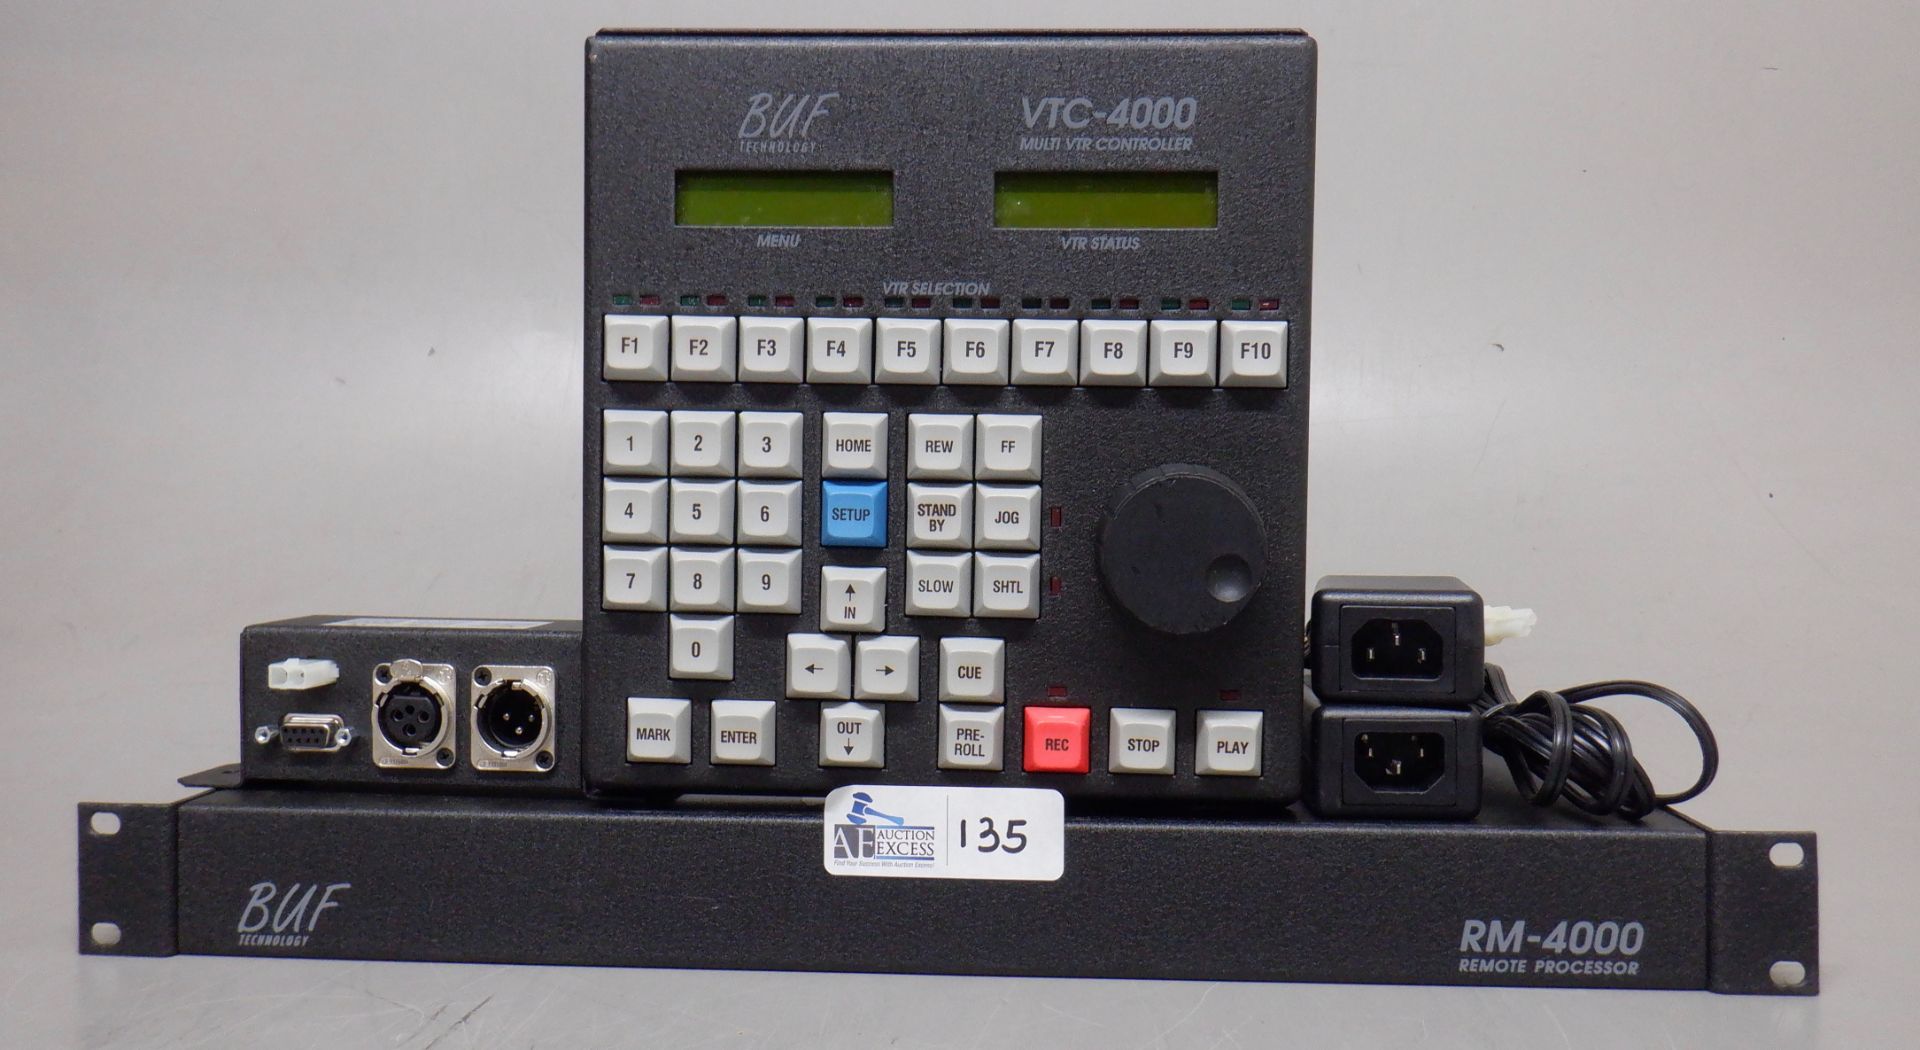 BUF CONTROLLER VTC-4000 WITH BUF RM-4000